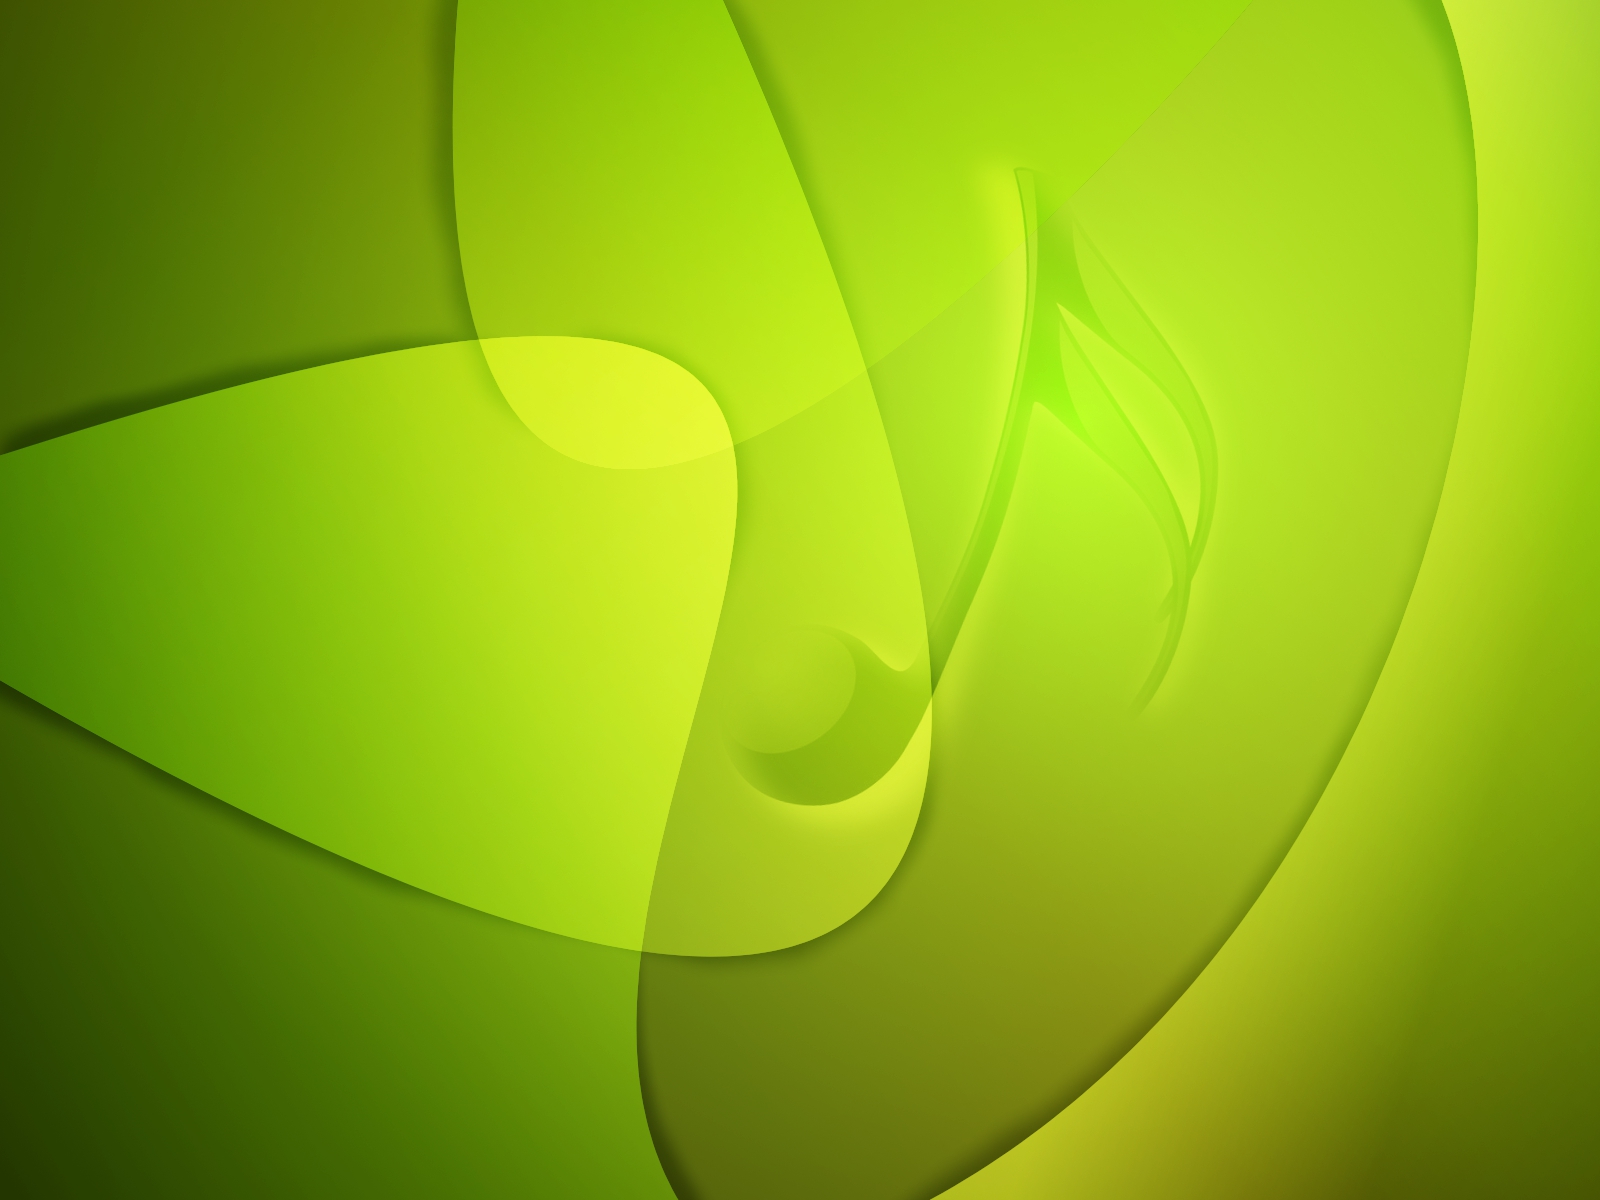 Vibrant green and yellow musical note on a HD desktop wallpaper by jacksta.